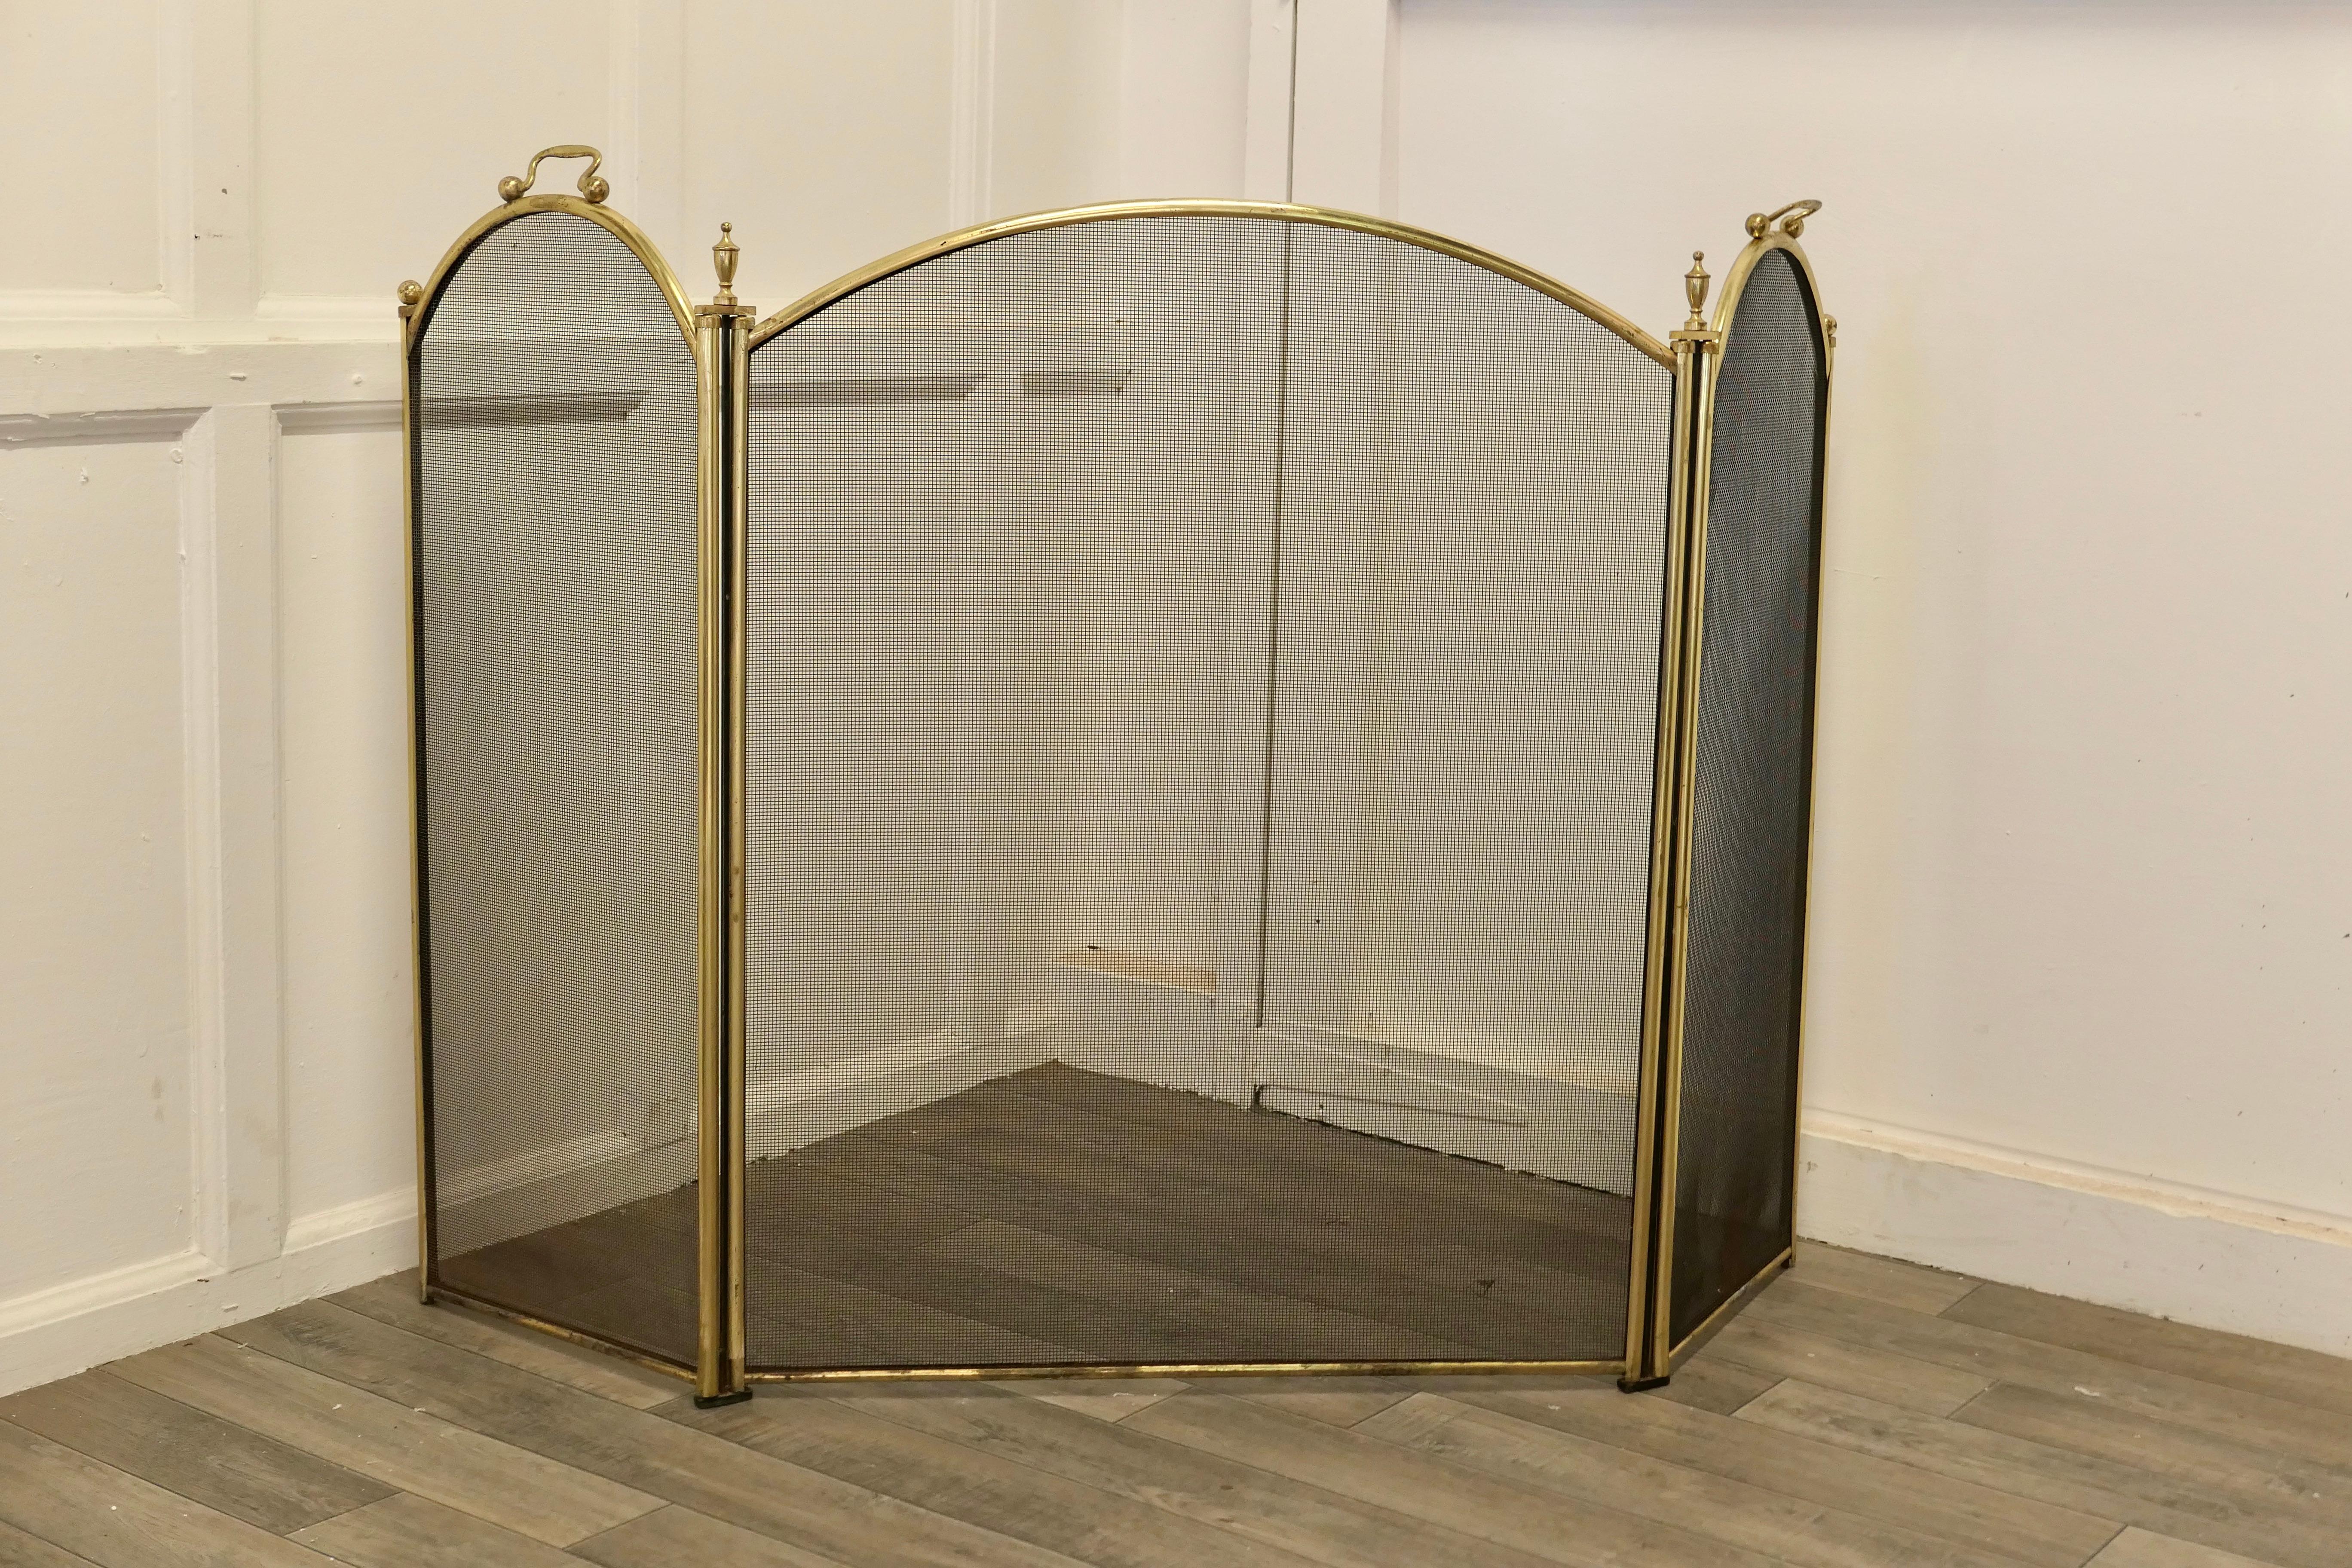 Large folding brass and iron fire guard for inglenook fireplace.

This very useful spark guard has a 3 fold brass frame and a fine black mesh infill decorated with brass finials along the top 
When opened out the screen can be shaped to enclose